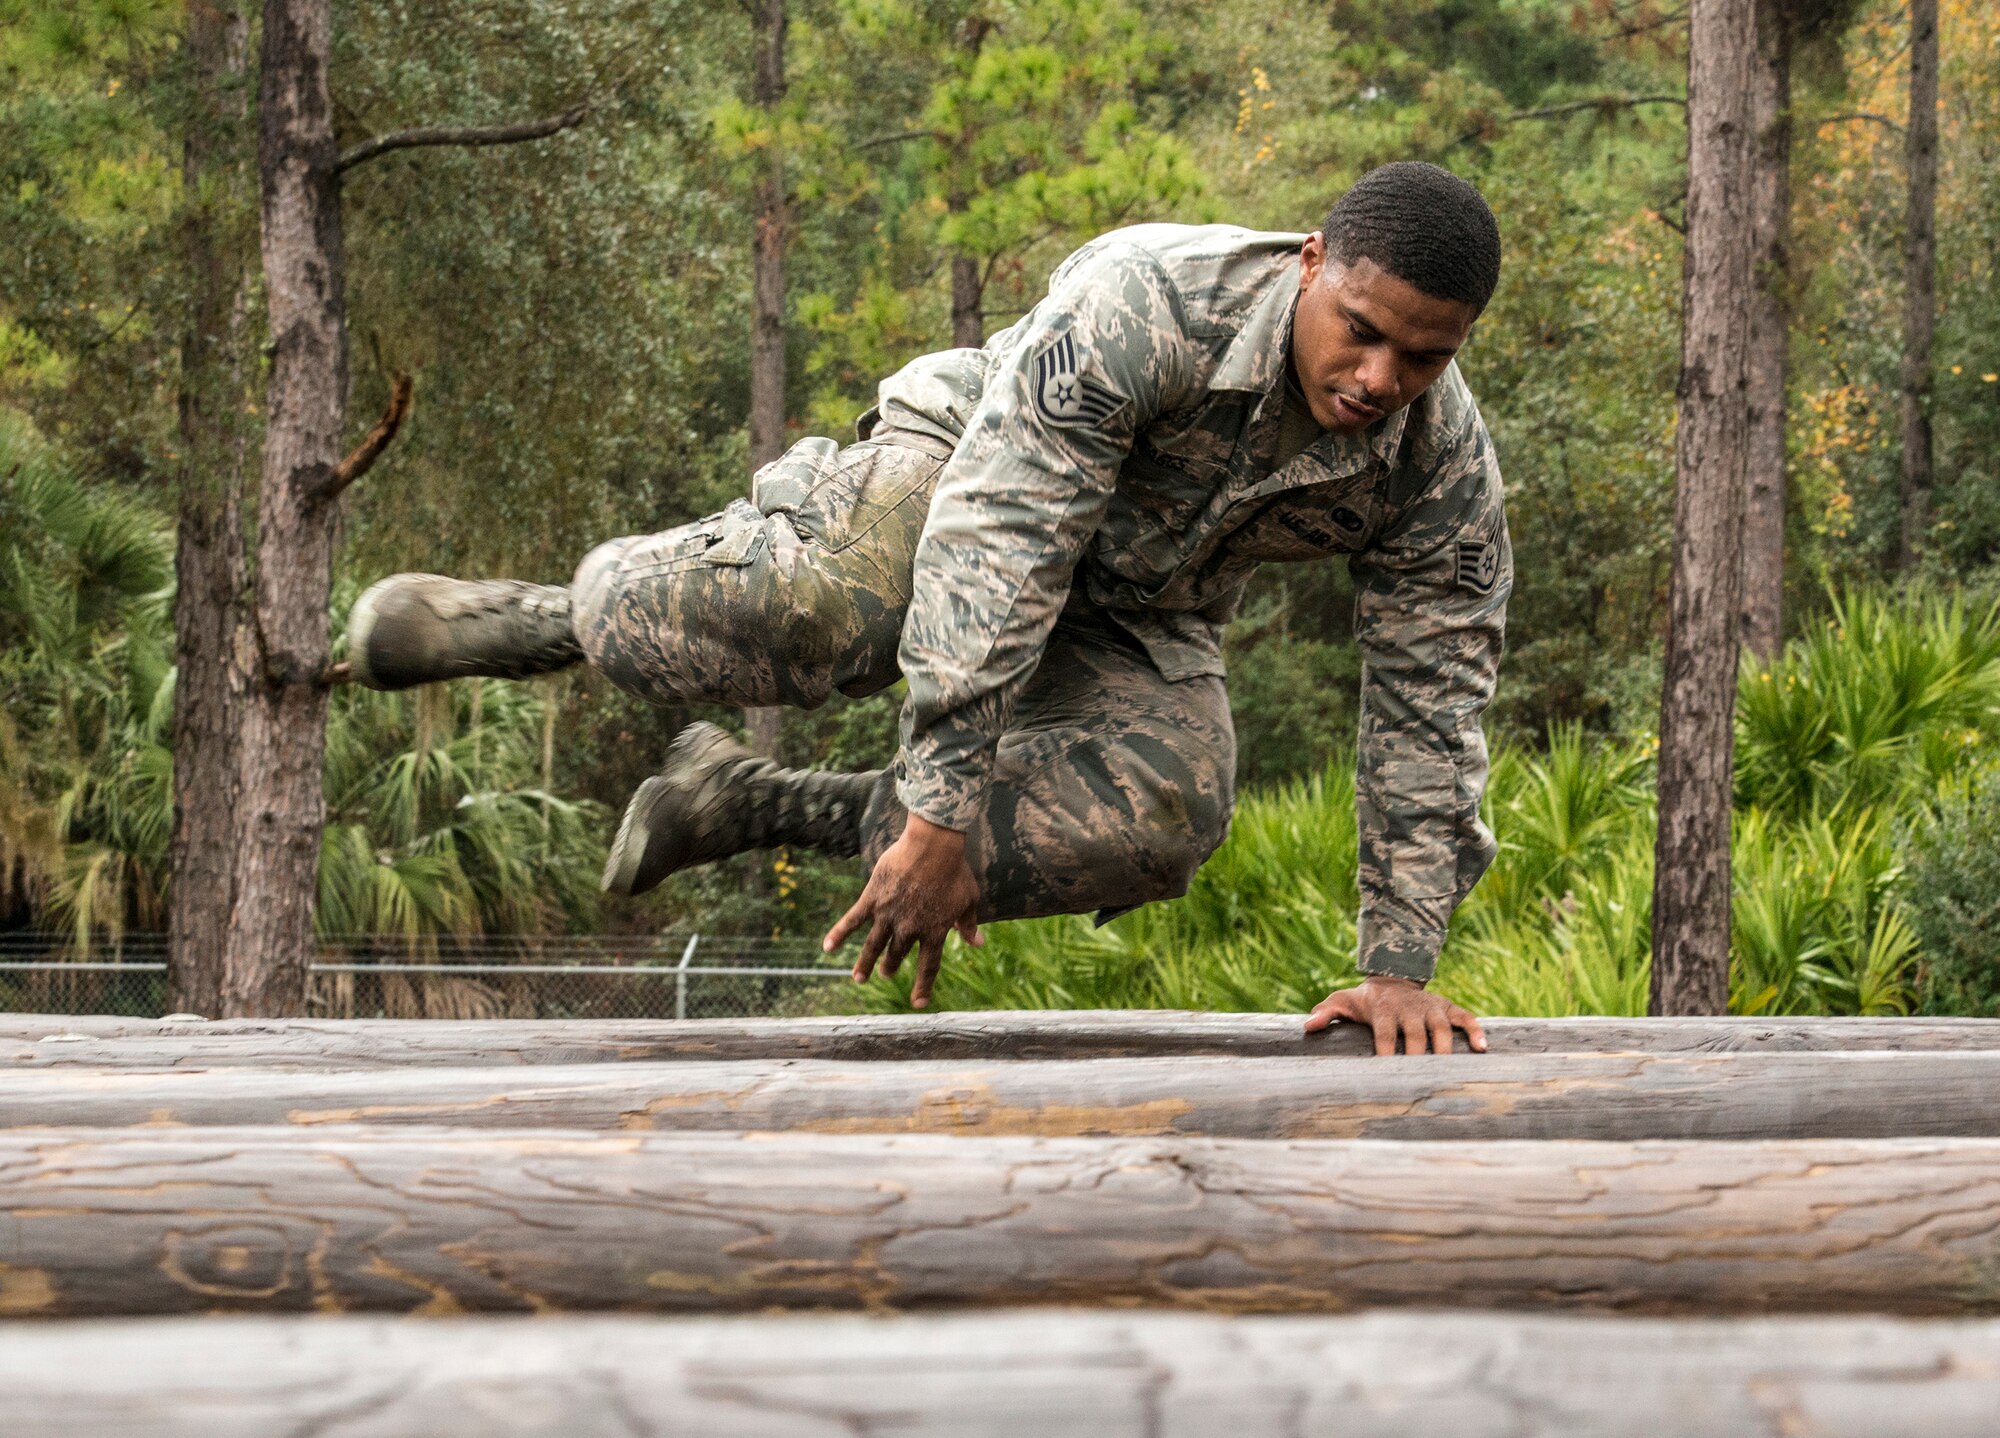 U.S. Air Force Staff Sgt. Dontavian Staggs, 820th Base Defense Group fireteam leader, jumps over an obstacle during an air assault assessment, Dec. 15, 2015, at Camp Blanding, Fla. During this exercise, Airmen had to jump over the 3-foot obstacle, letting only their hands touch the logs. (U.S. Air Force photo by Airman 1st Class Lauren M. Johnson/Released)
